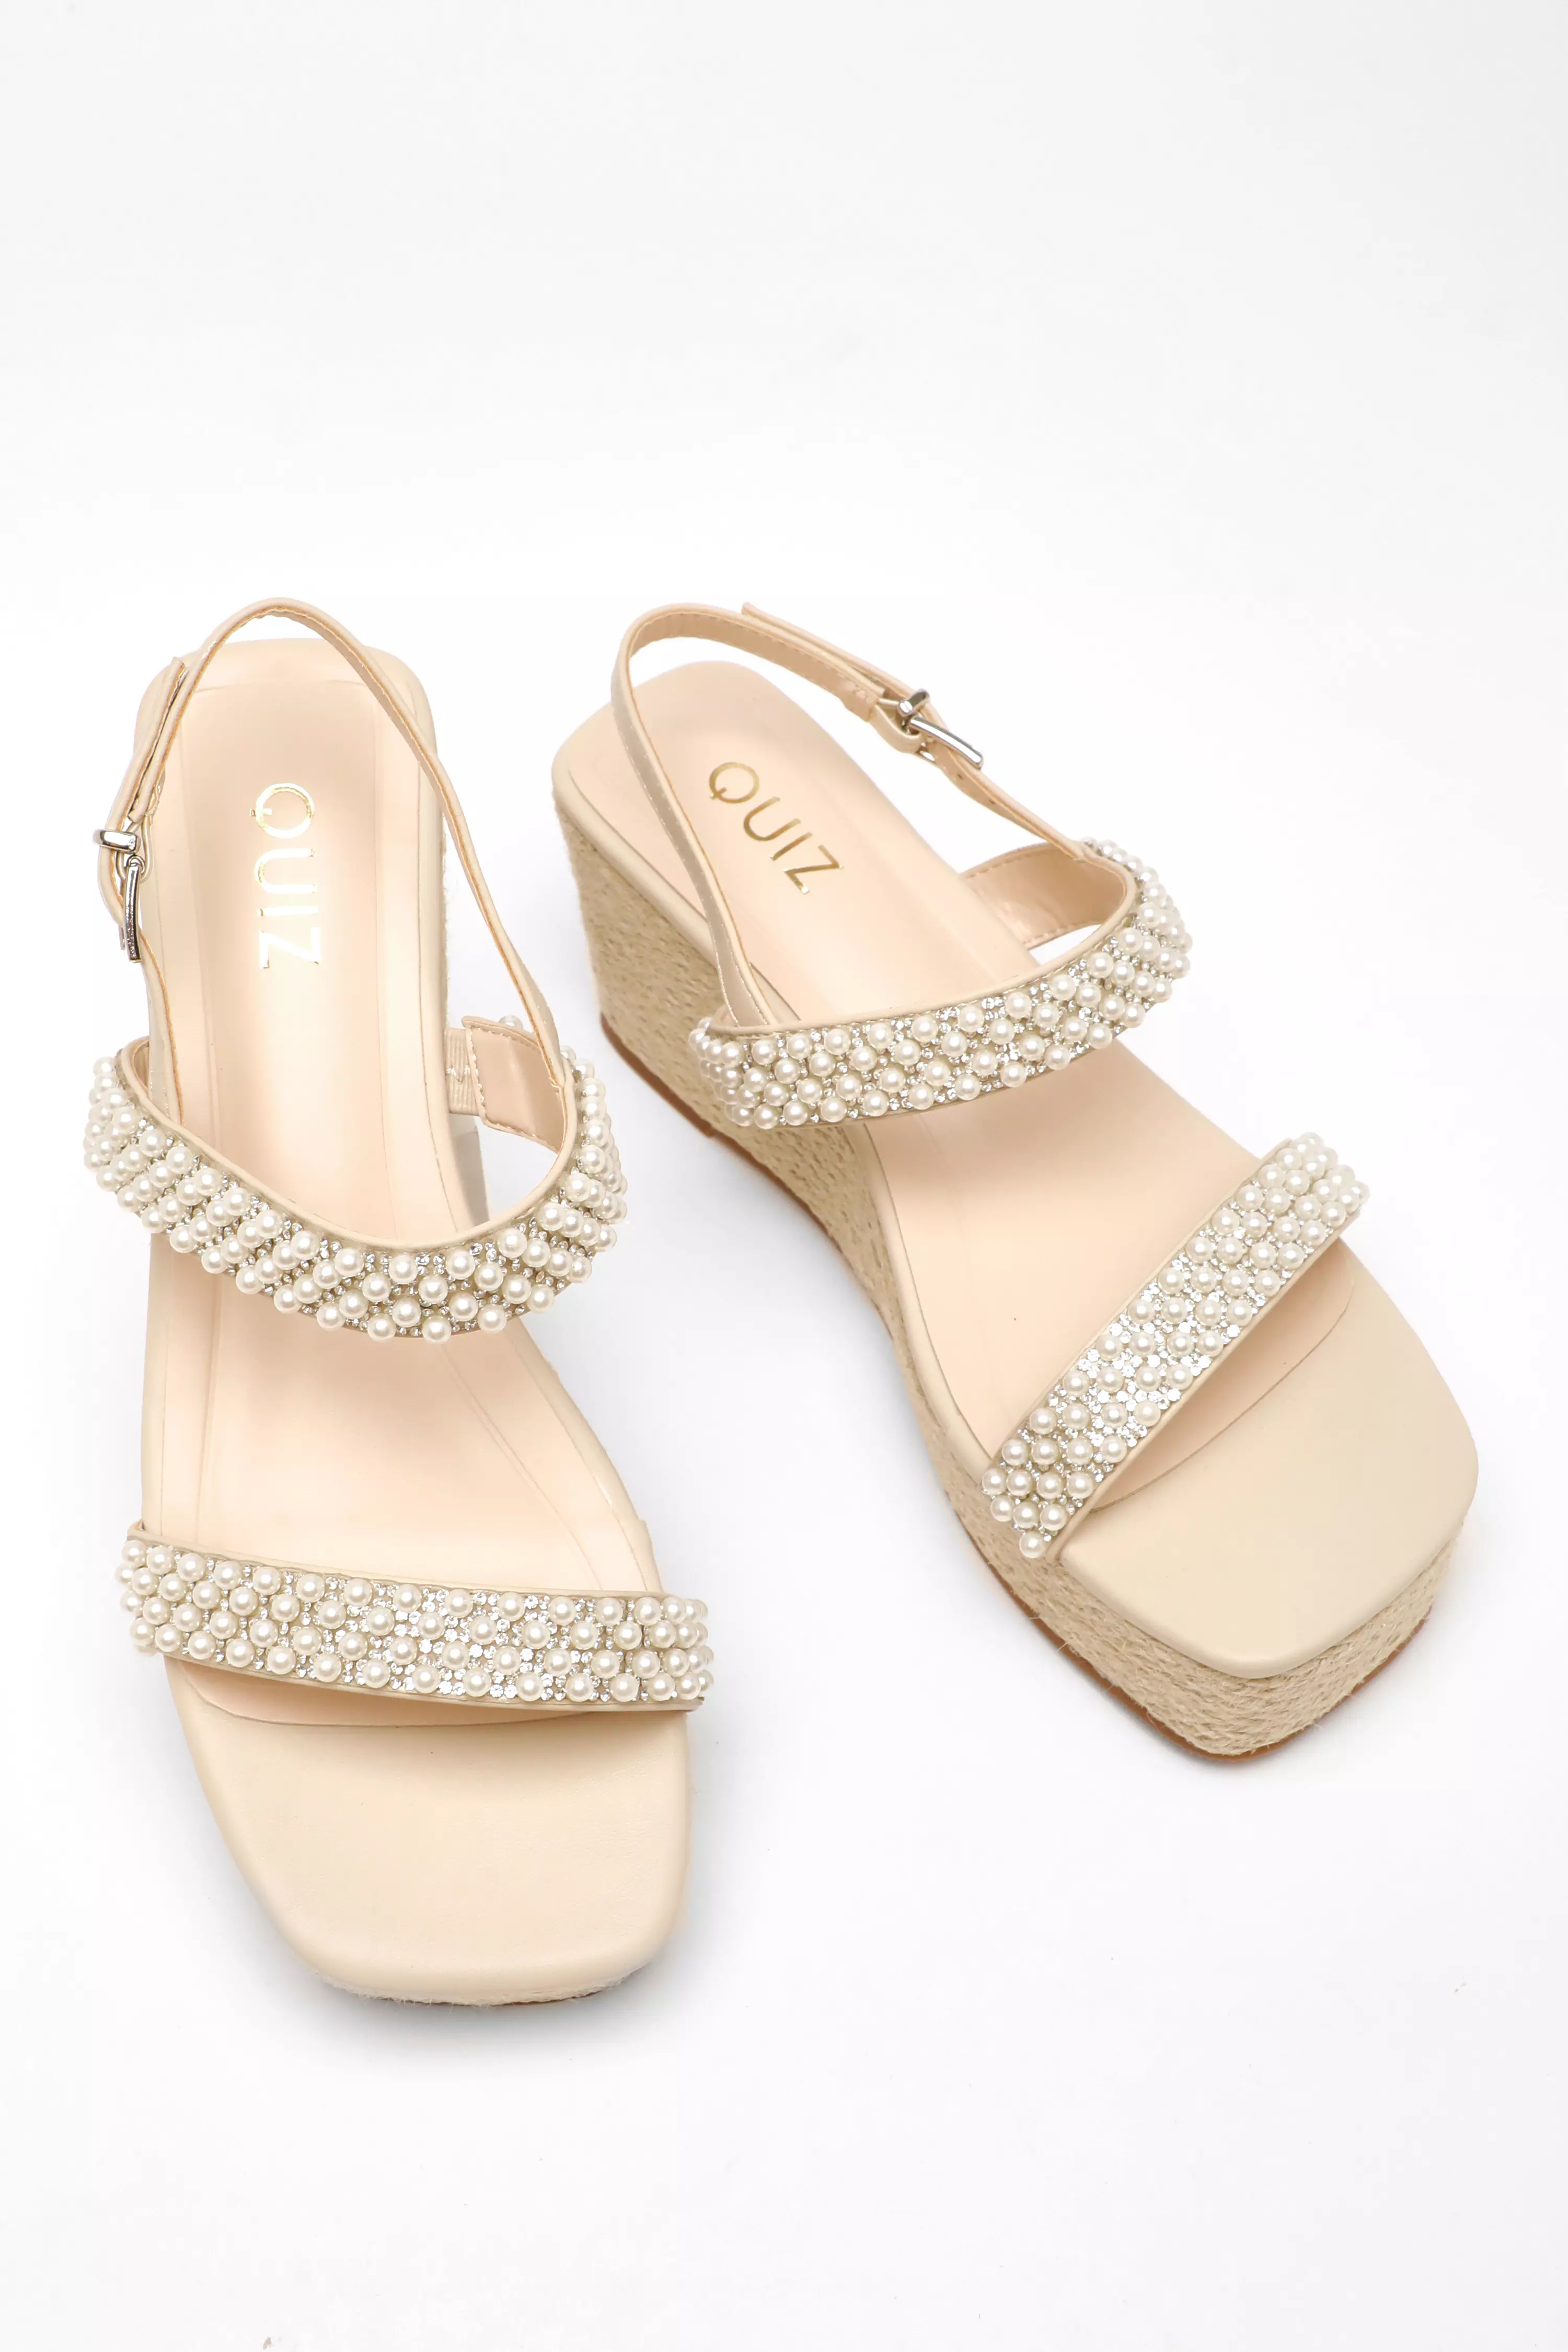 Cream Pearl Strap Woven Wedges